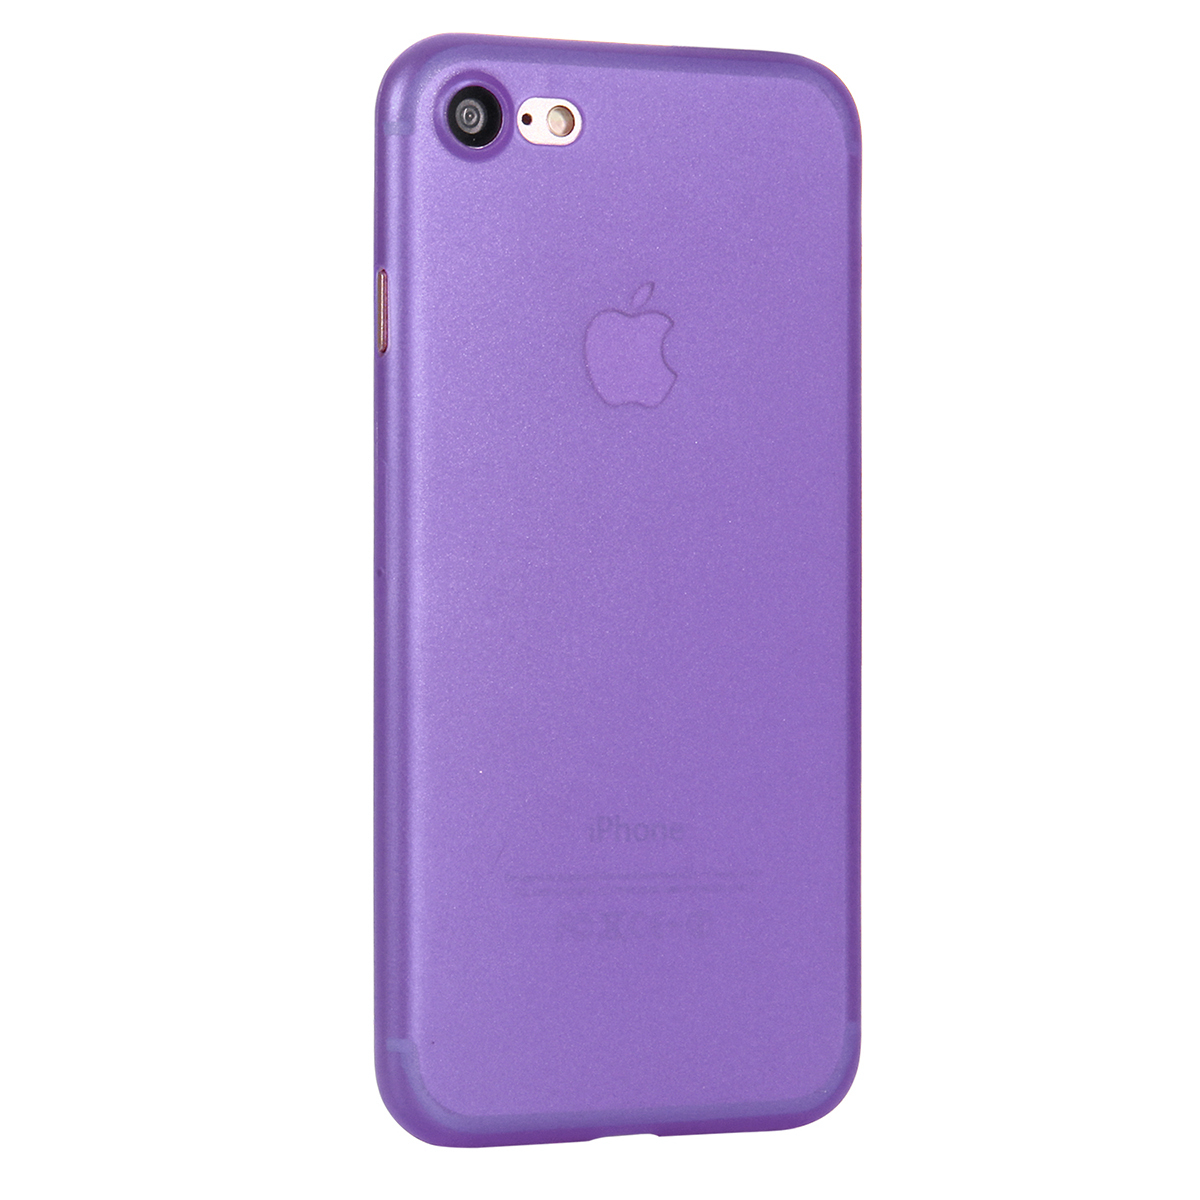 Ultra Slim Full Cover Frosted PC Phone Cover Case for iPhone 7/8 - Purple